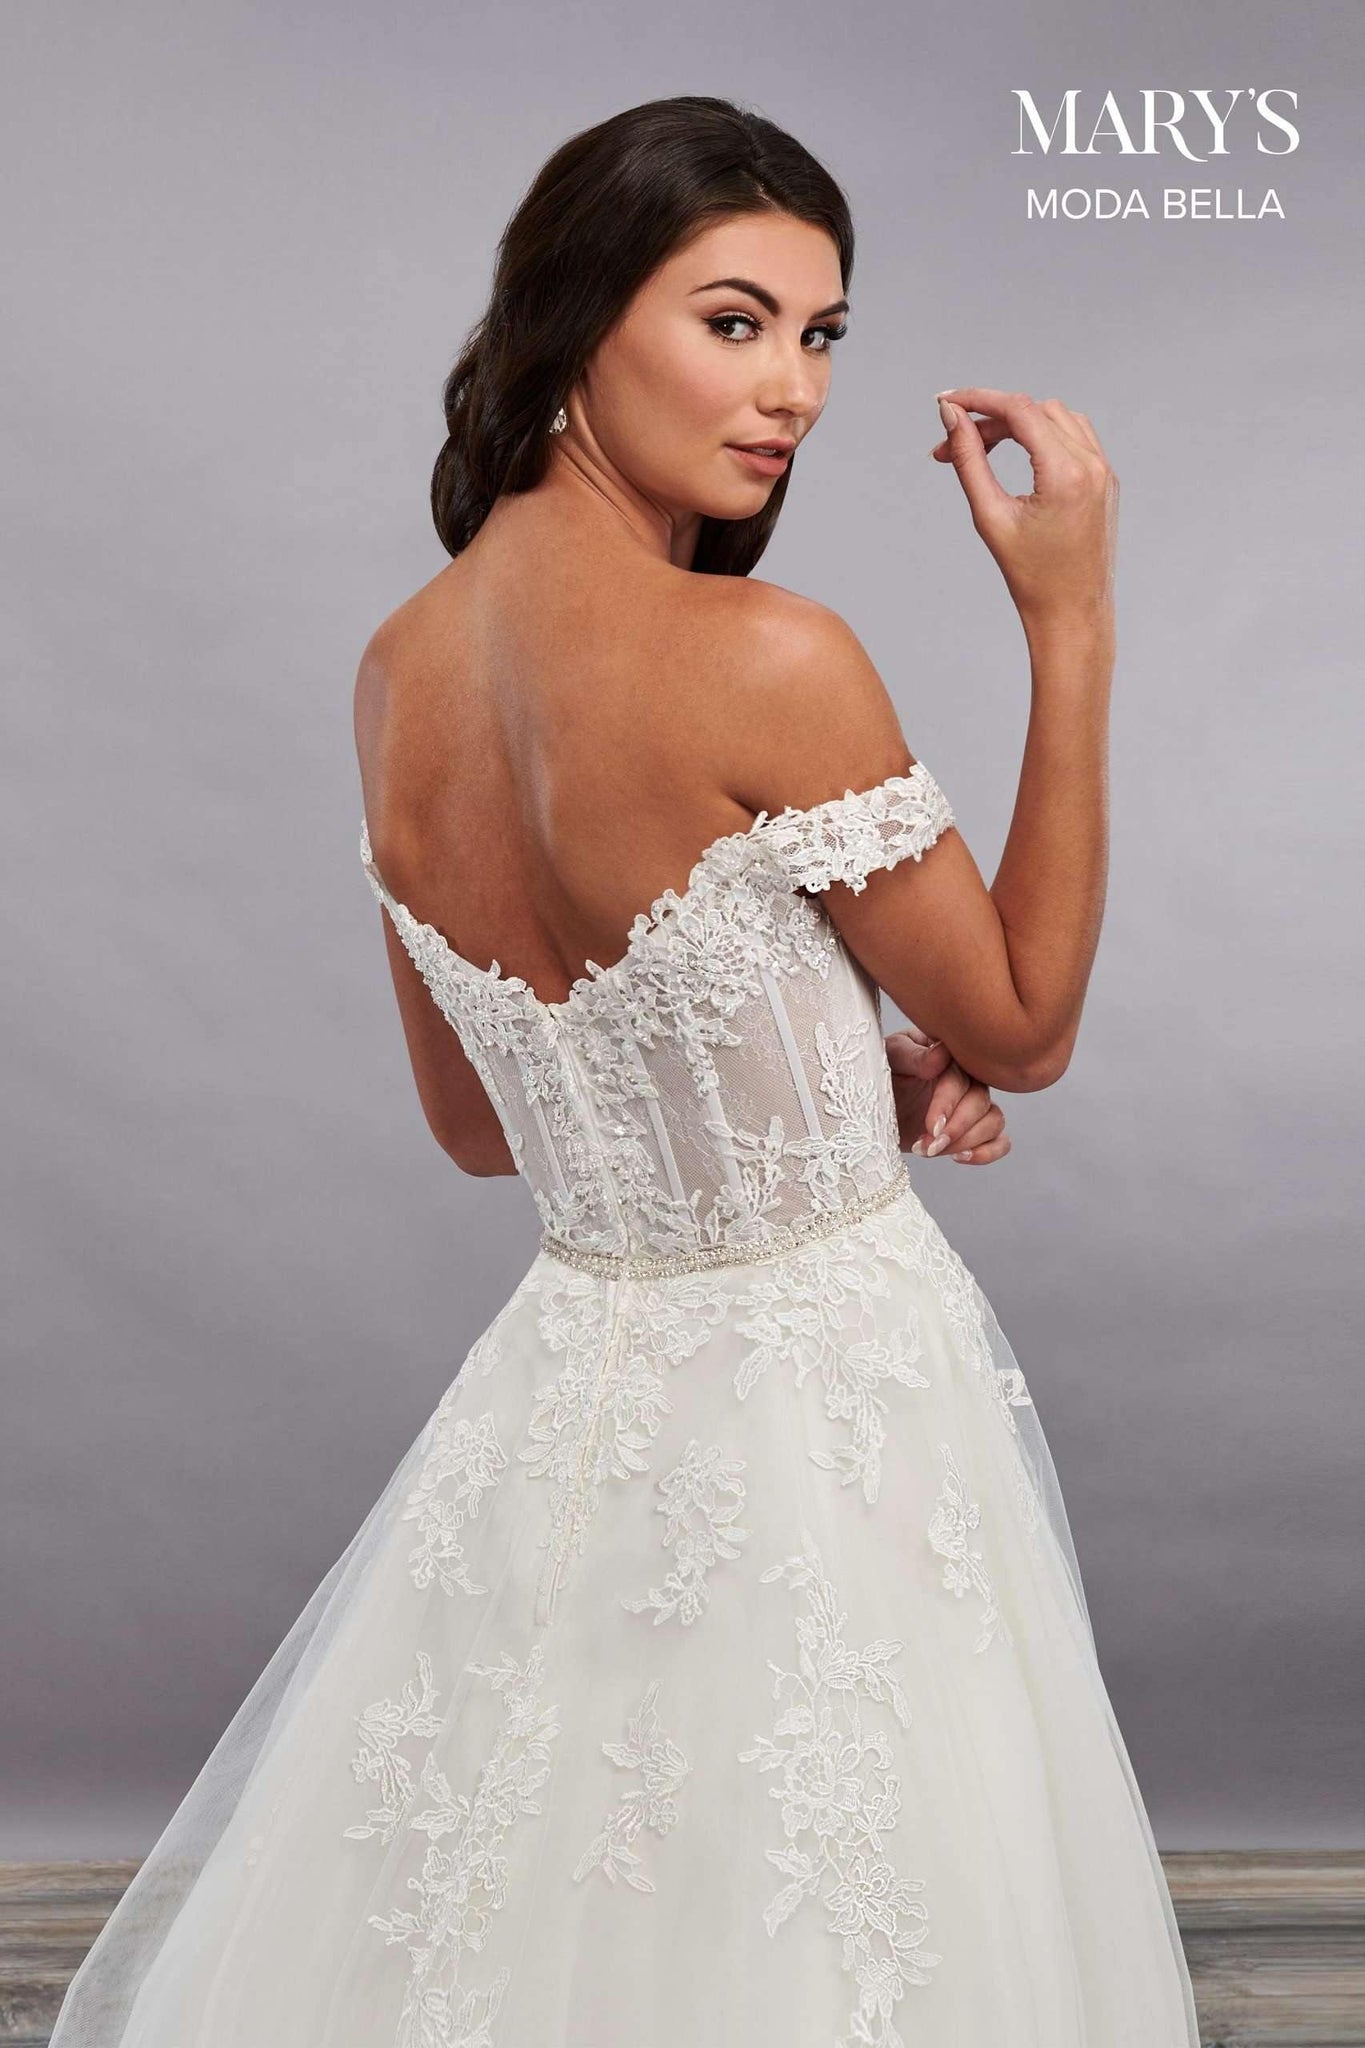 MARY'S BRIDAL - Carmen - Adore Bridal and Occasion Wear